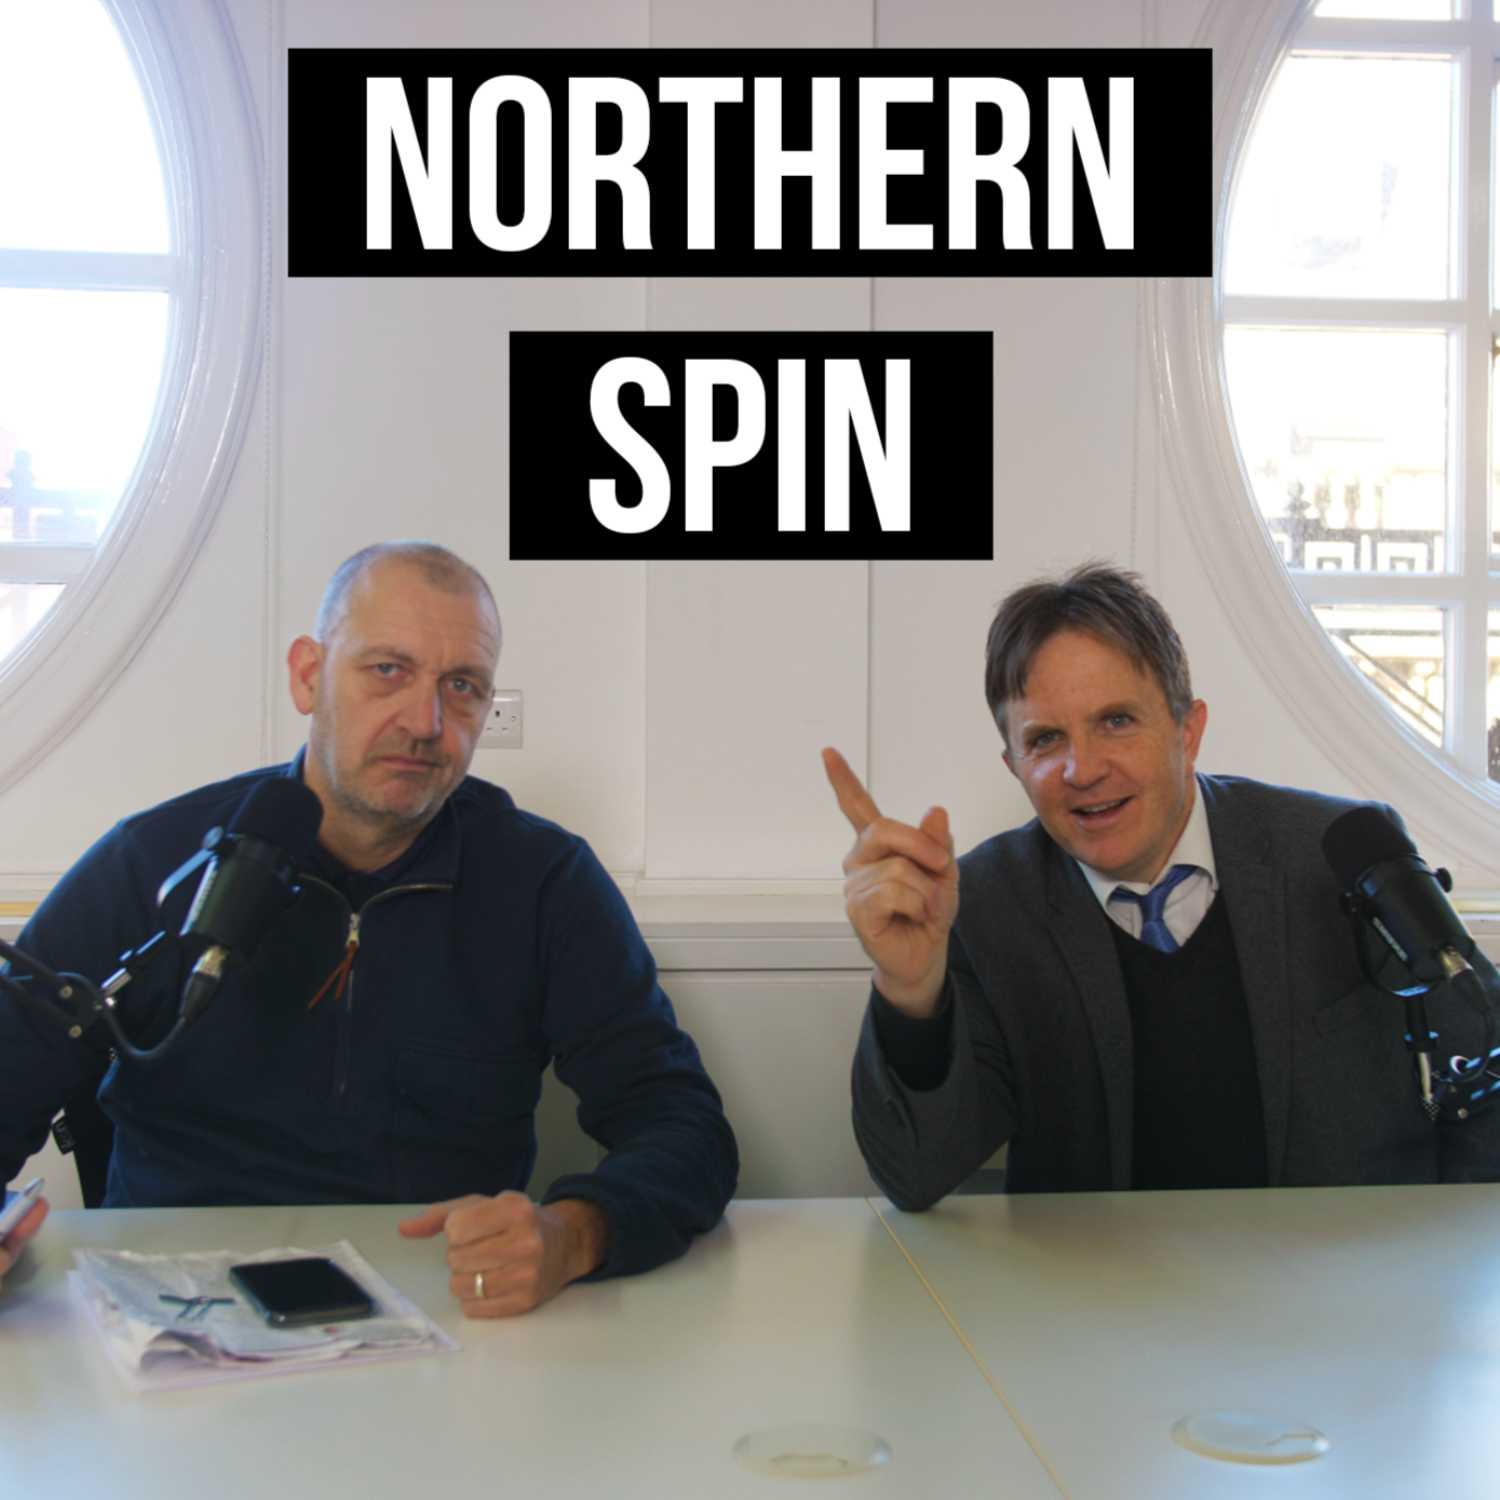 Northern Spin - Season 5 - Episode 9: Why Politicians Cosy up to Business